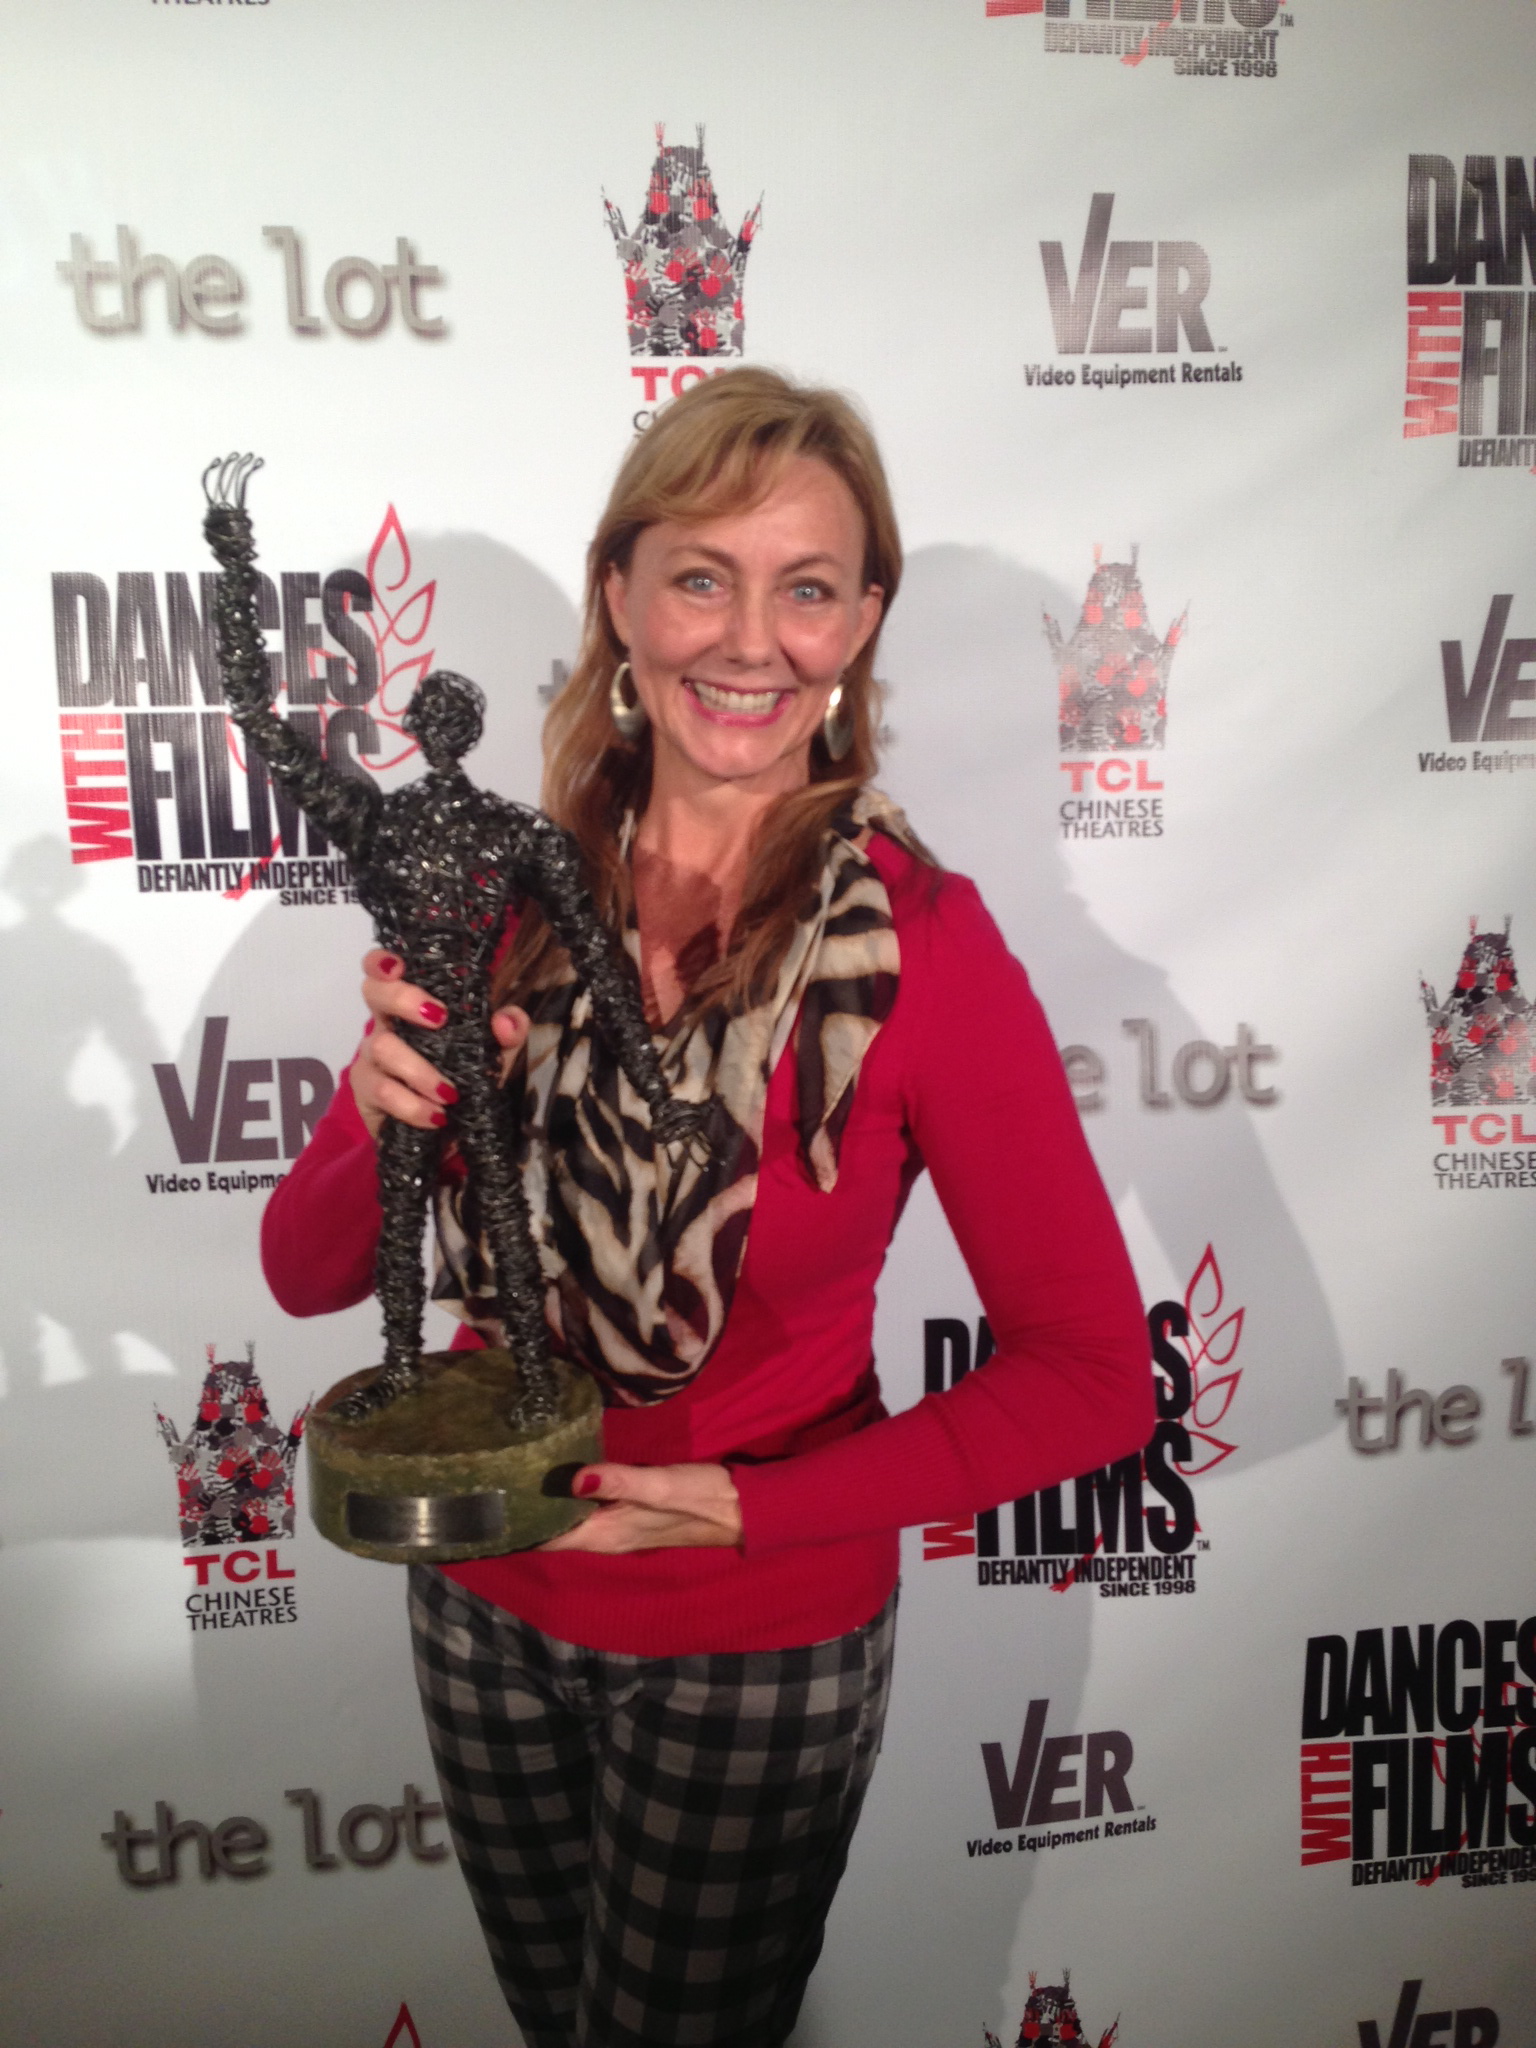 Grand Jury Award, top honor at the Dances With Films Festival for our film 